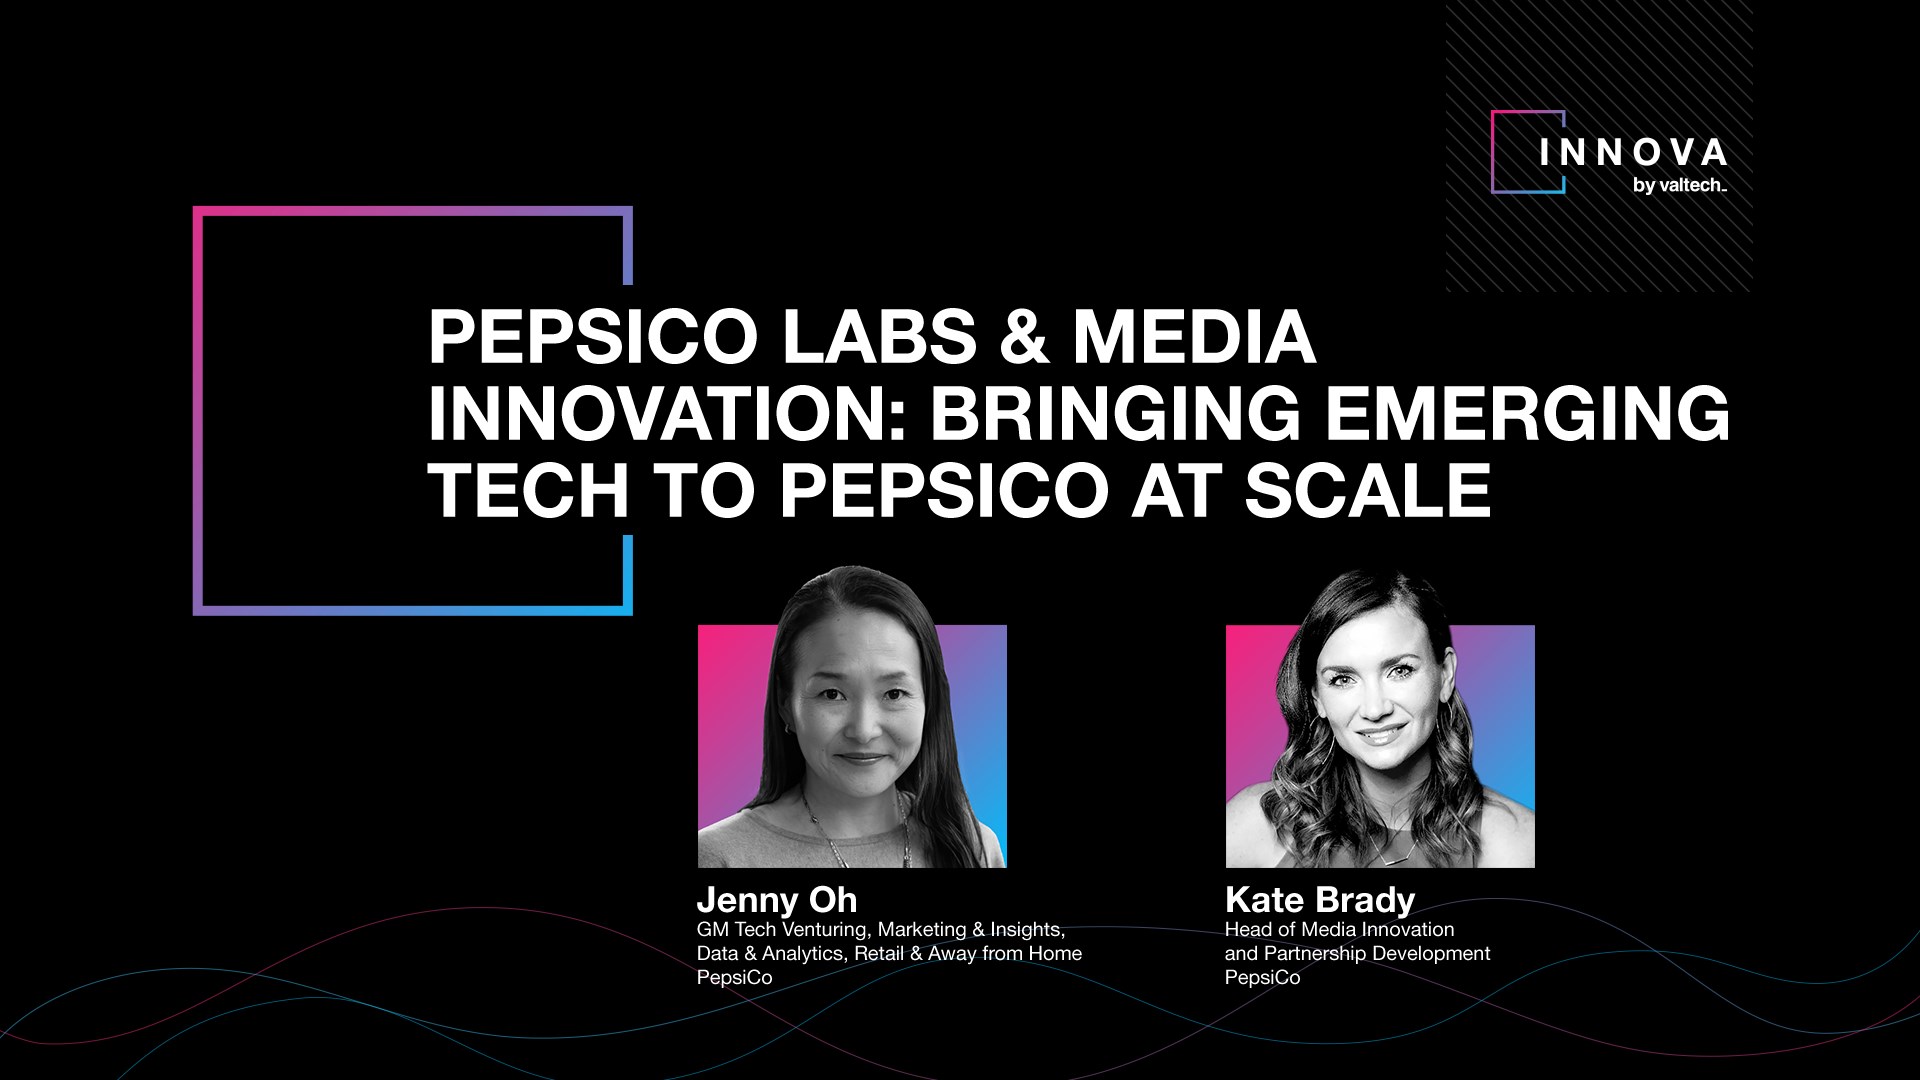 Bringing emerging tech to PepsiCo at scale